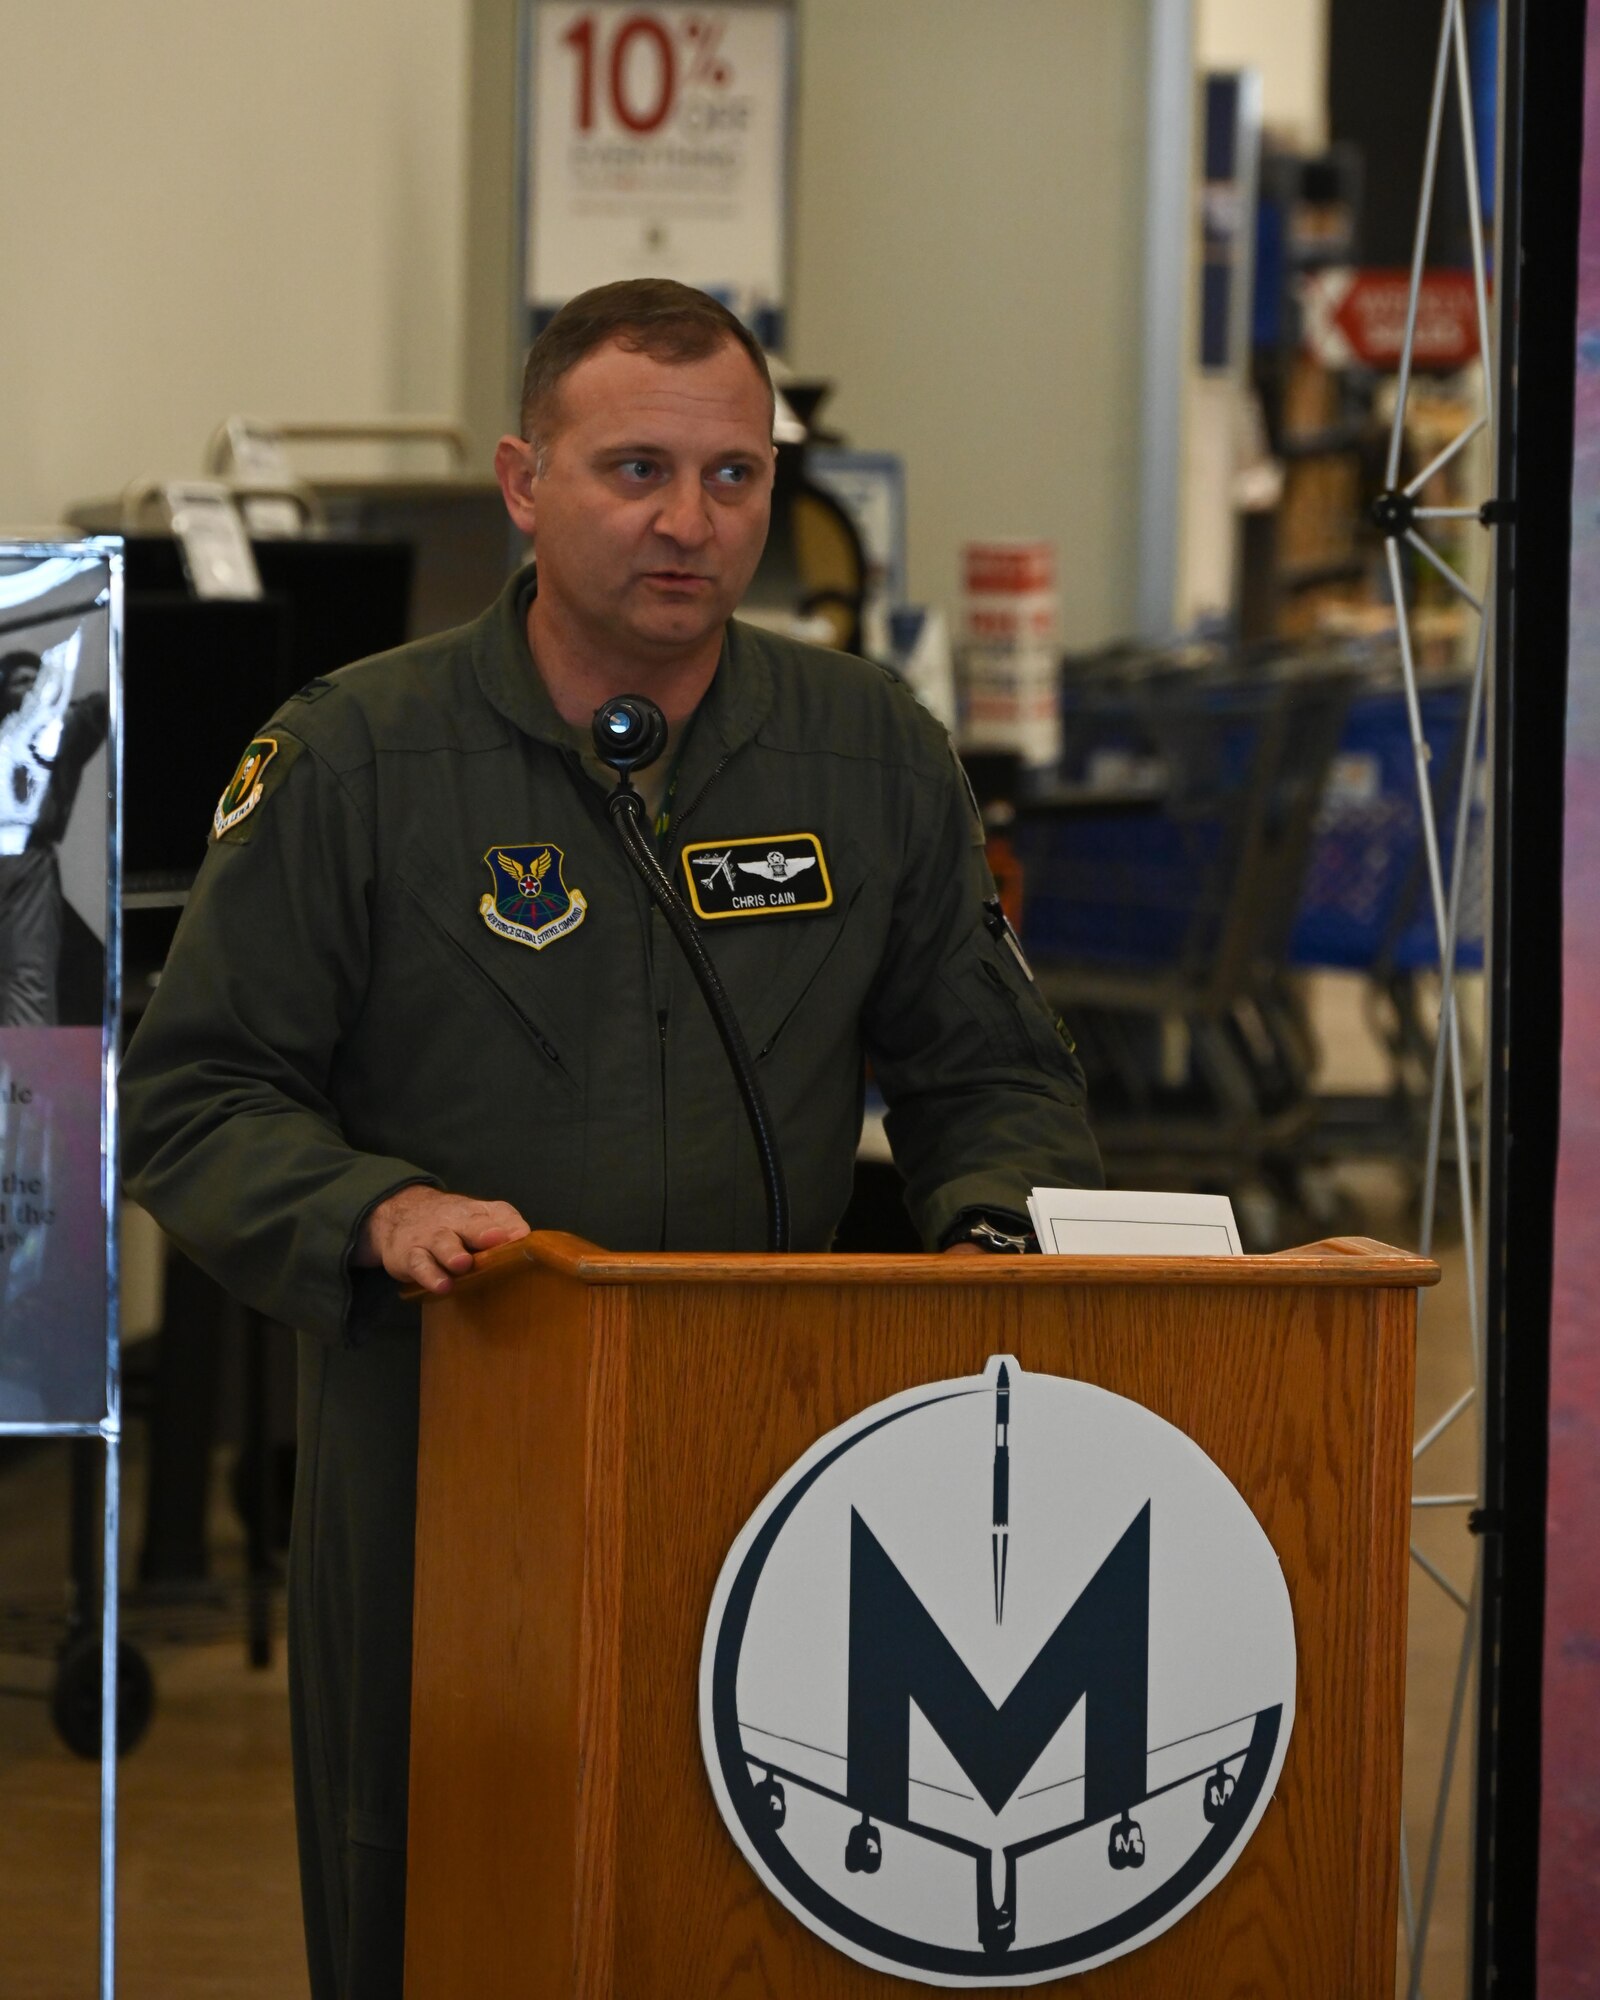 Col. Chris Cain, 5th Bomb Wing vice commander, provides opening remarks at the 2023 Women’s History Month opening ceremony and proclamation signing at Minot Air Force Base, North Dakota, March 6, 2023. “Women are essential to Team Minot and the Air Force,” said Cain. “We are paying attention to these pathmakers, and are very excited to recognize the contributions and sacrifices they make every day.” (U.S. Air Force photo by Senior Airman Caleb S. Kimmell)